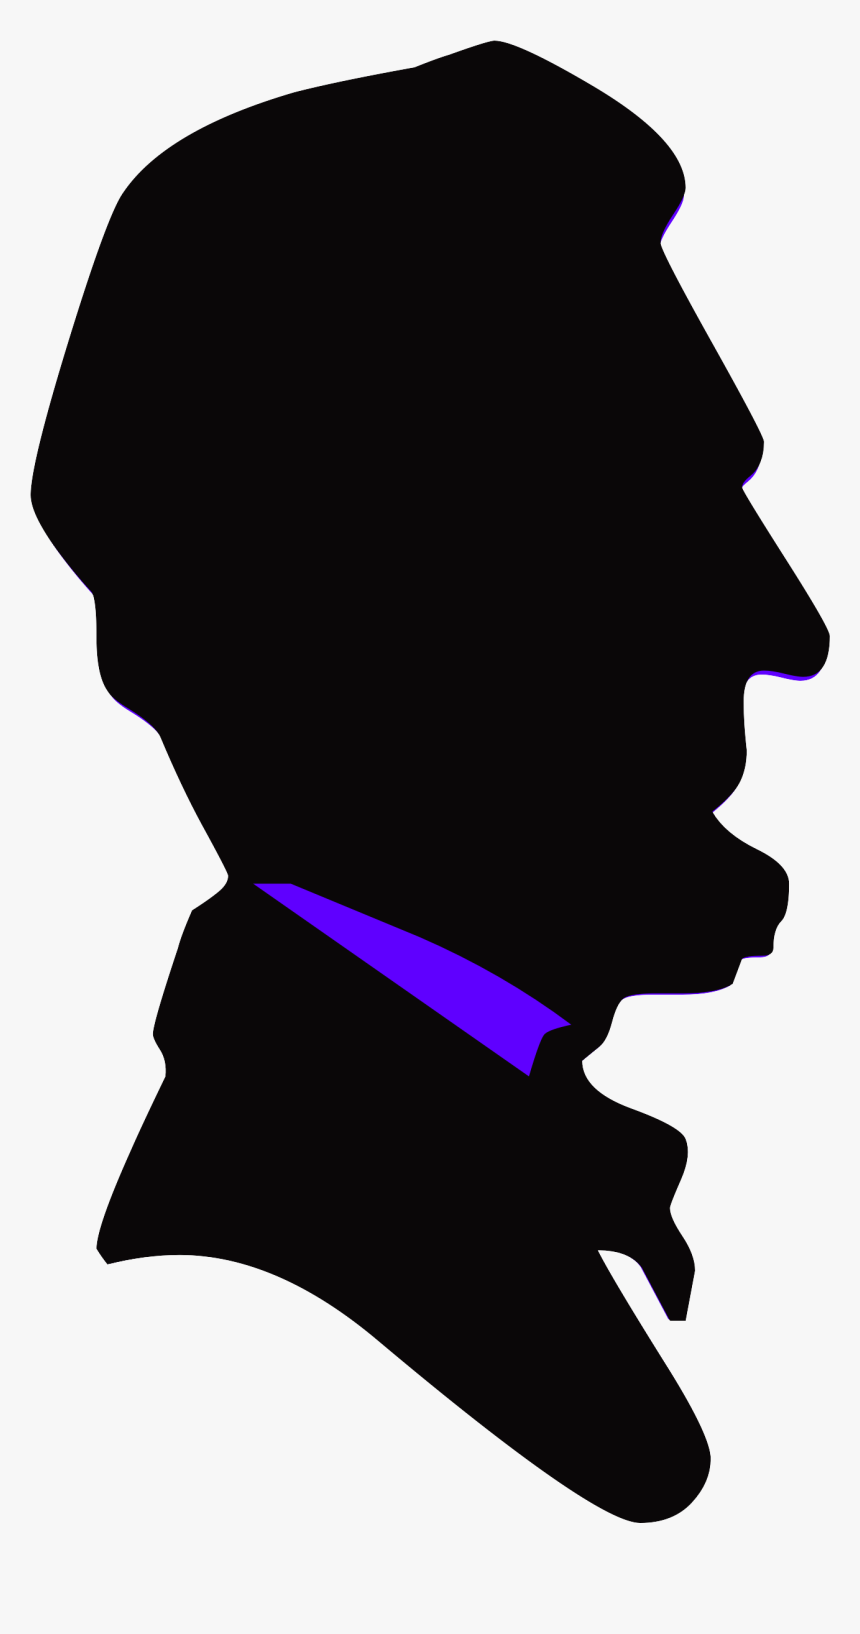 Abraham Lincoln Silhouette - Abraham Lincoln Silhouette Png, Transparent Png, Free Download